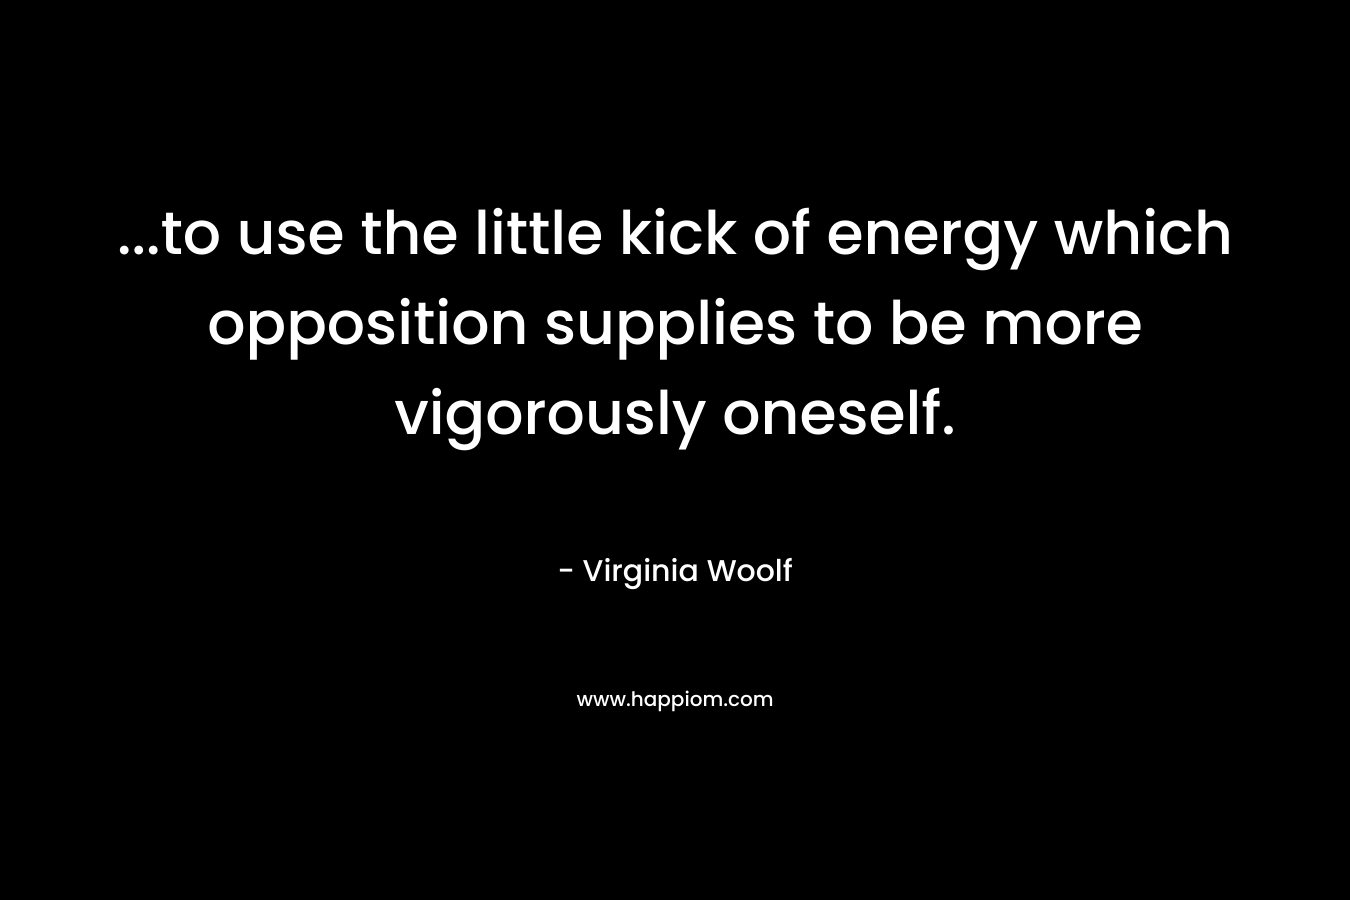 ...to use the little kick of energy which opposition supplies to be more vigorously oneself.